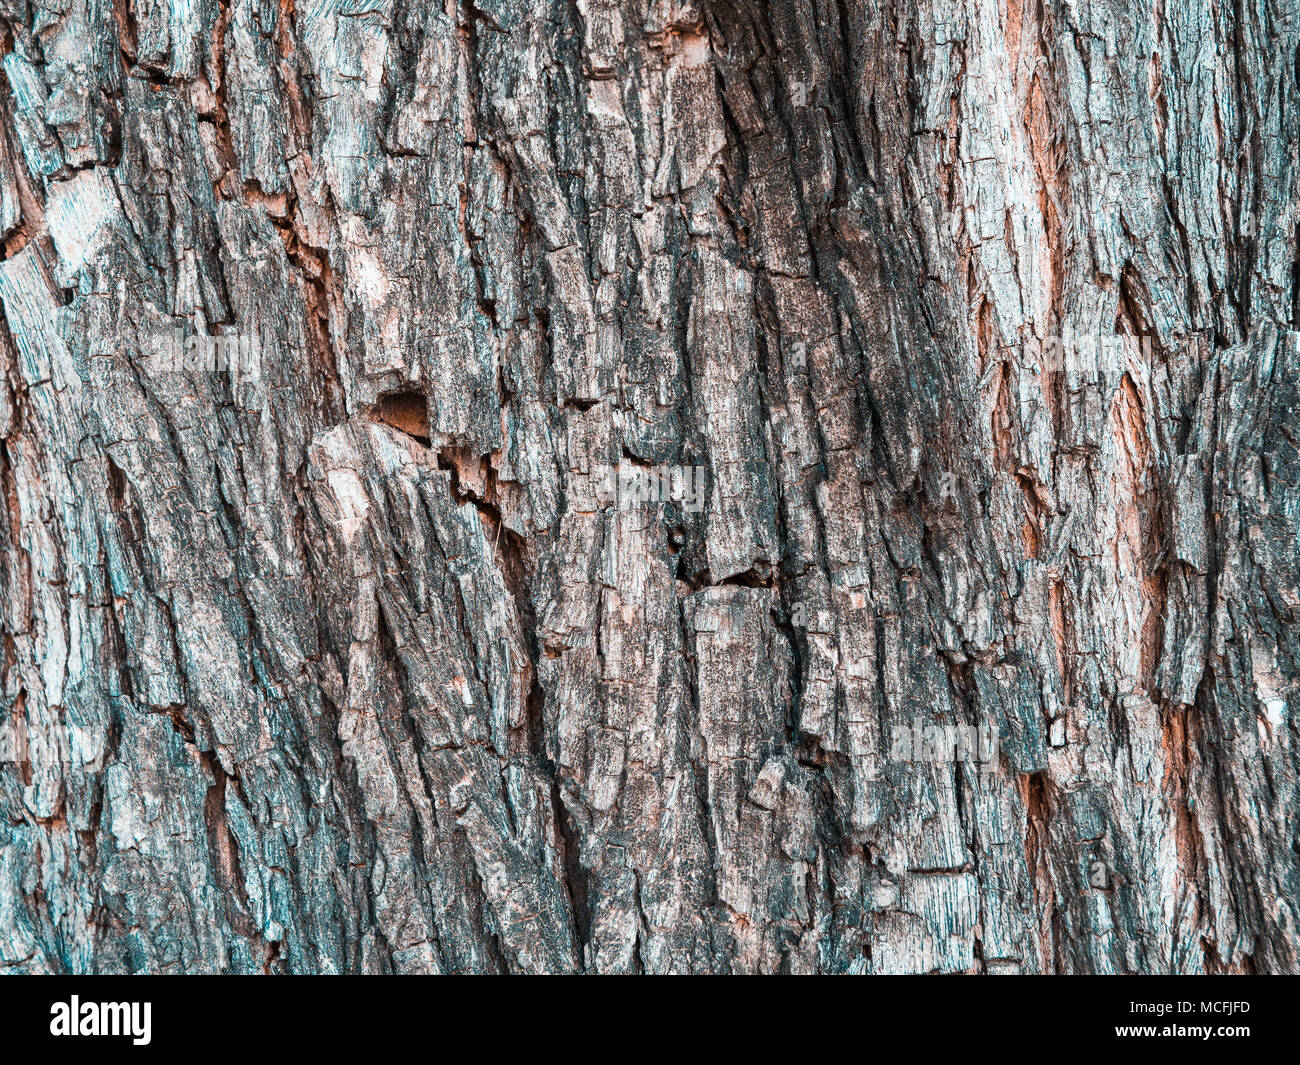 Wood textures for anything, even videogames development. Stock Photo